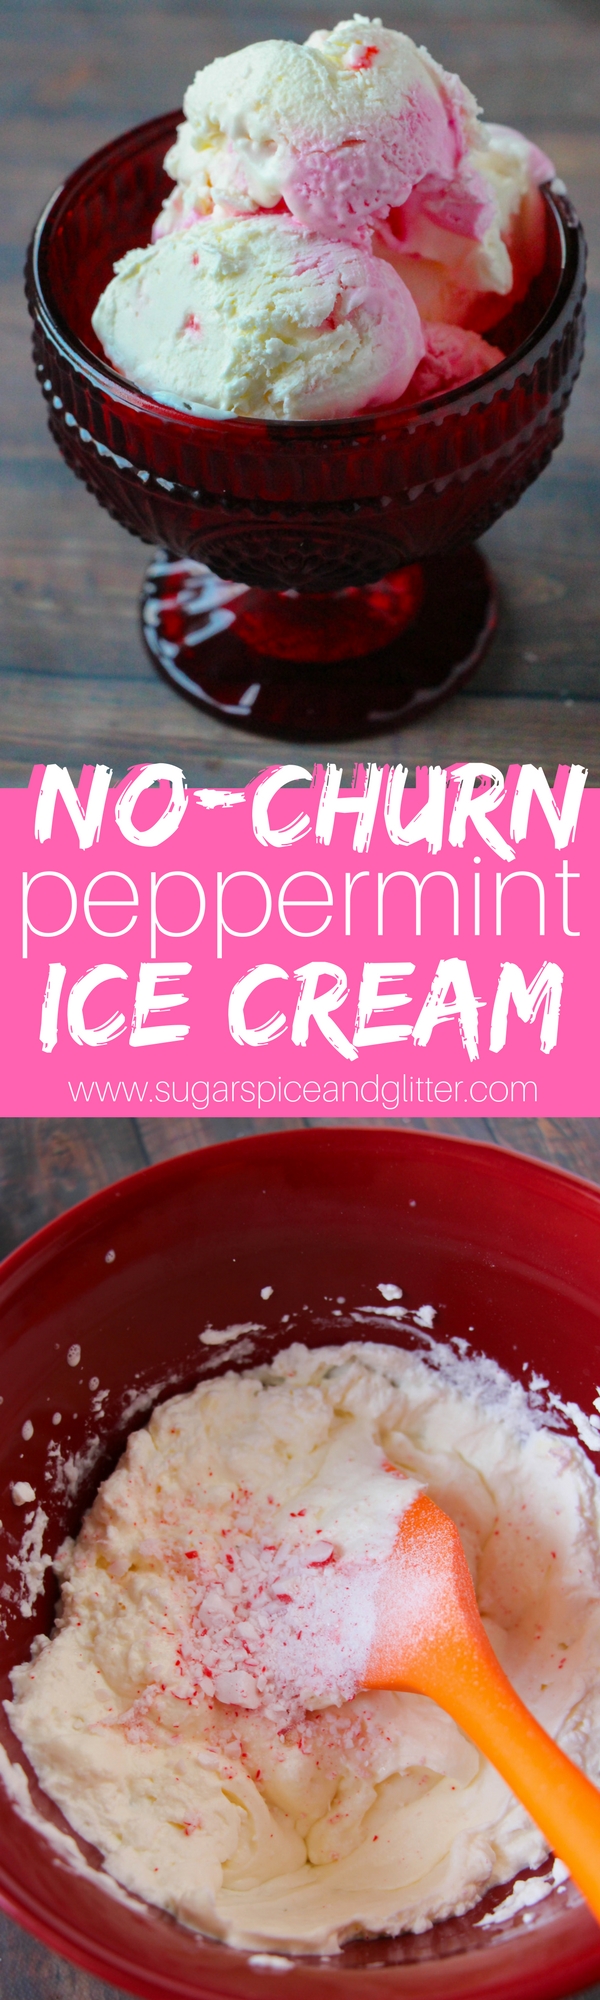 How to make the best peppermint ice cream and skip the expensive cartons of candy cane ice cream at the store! This peppermint ice cream recipe can be made without an ice cream machine and just 5 ingredients